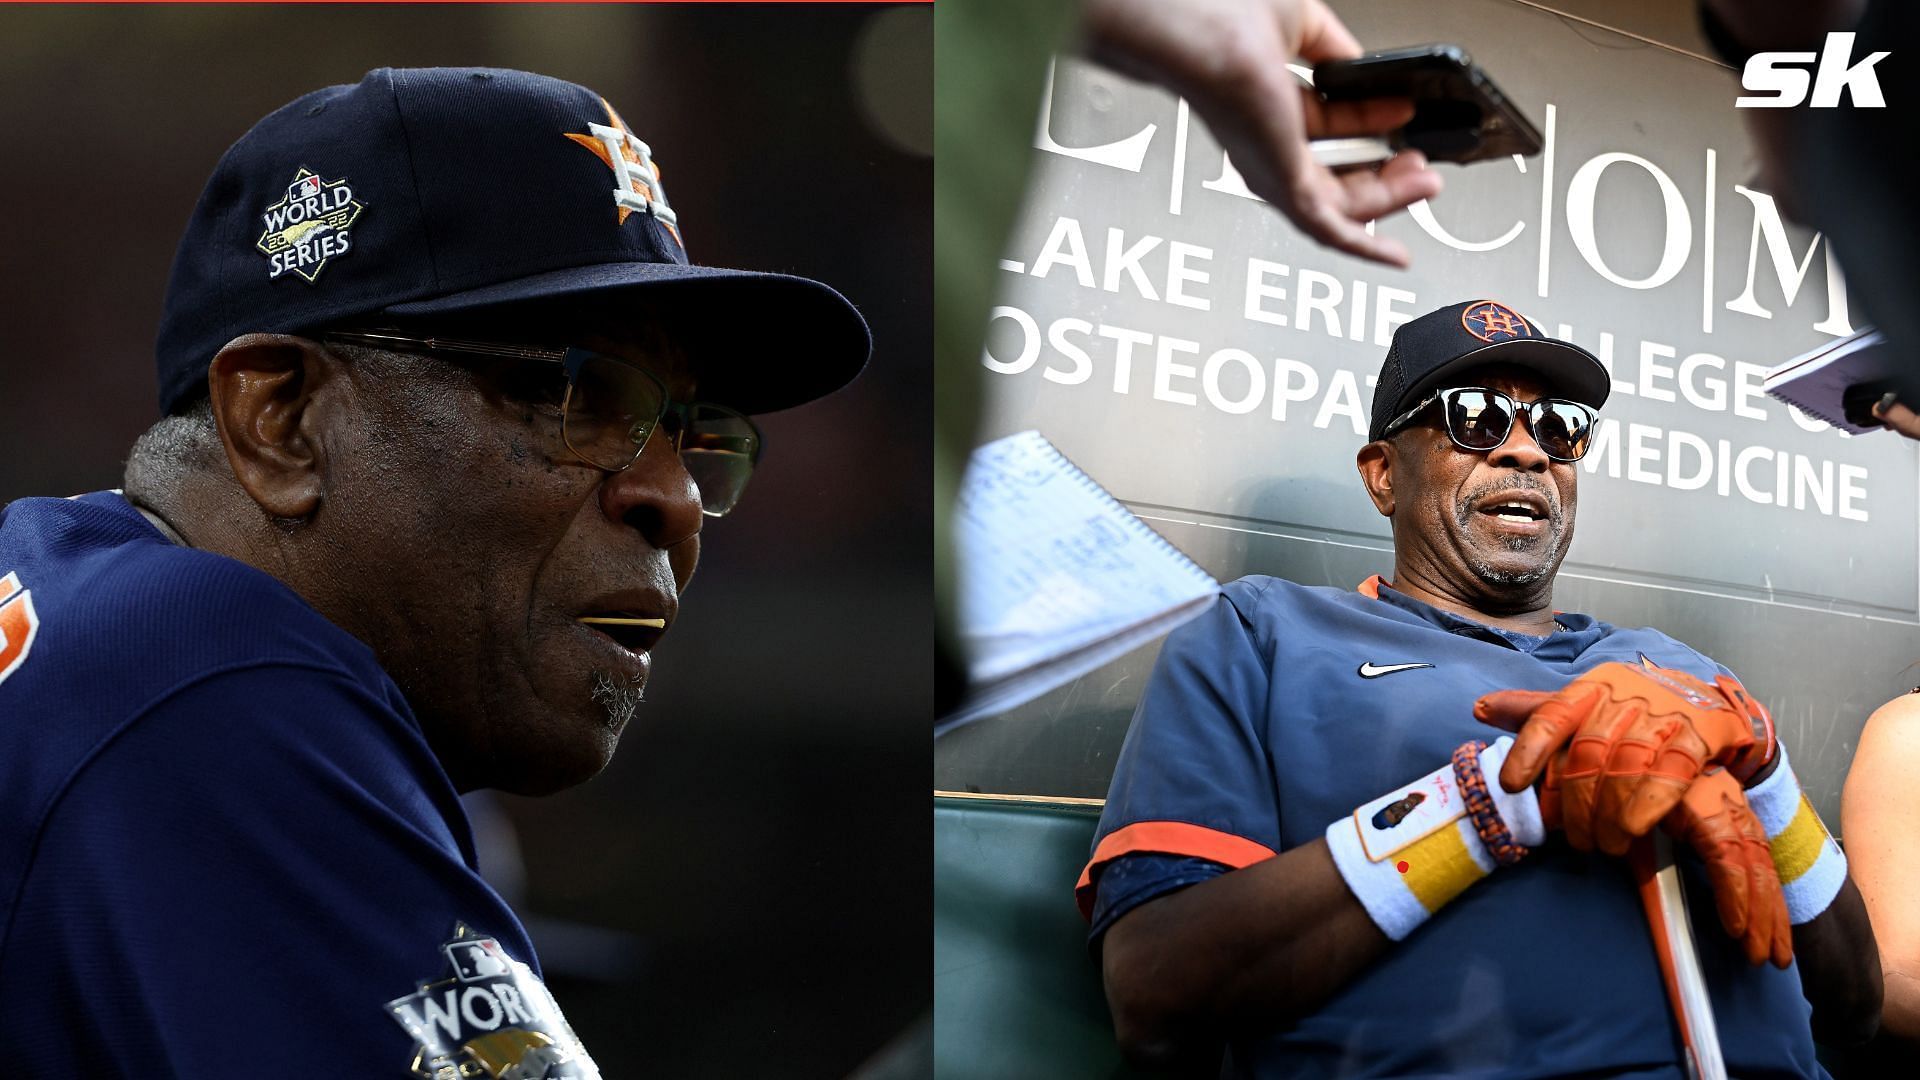 Sa Francisco Giants fans are lukewarm about bringing on Dusty Baker 